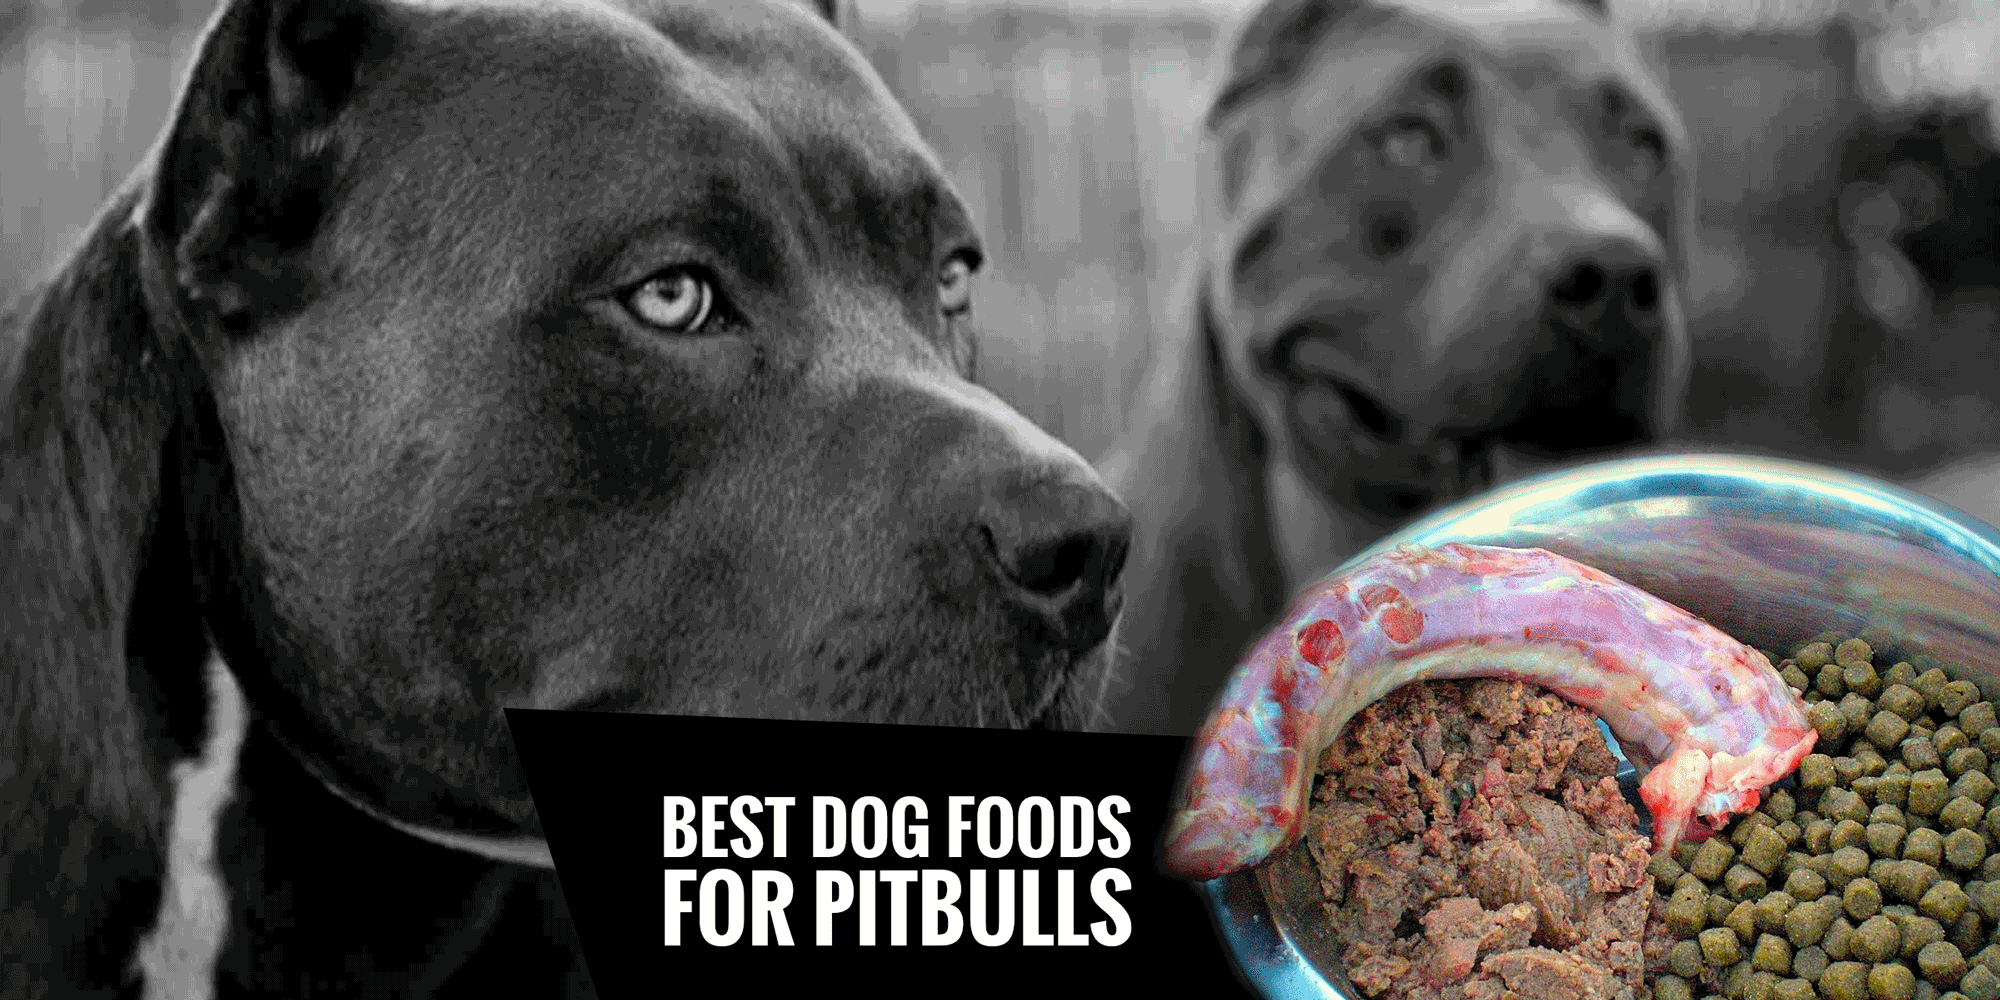 4 Best Dog Foods for Pitbulls — Natural, High Protein, Low Fat